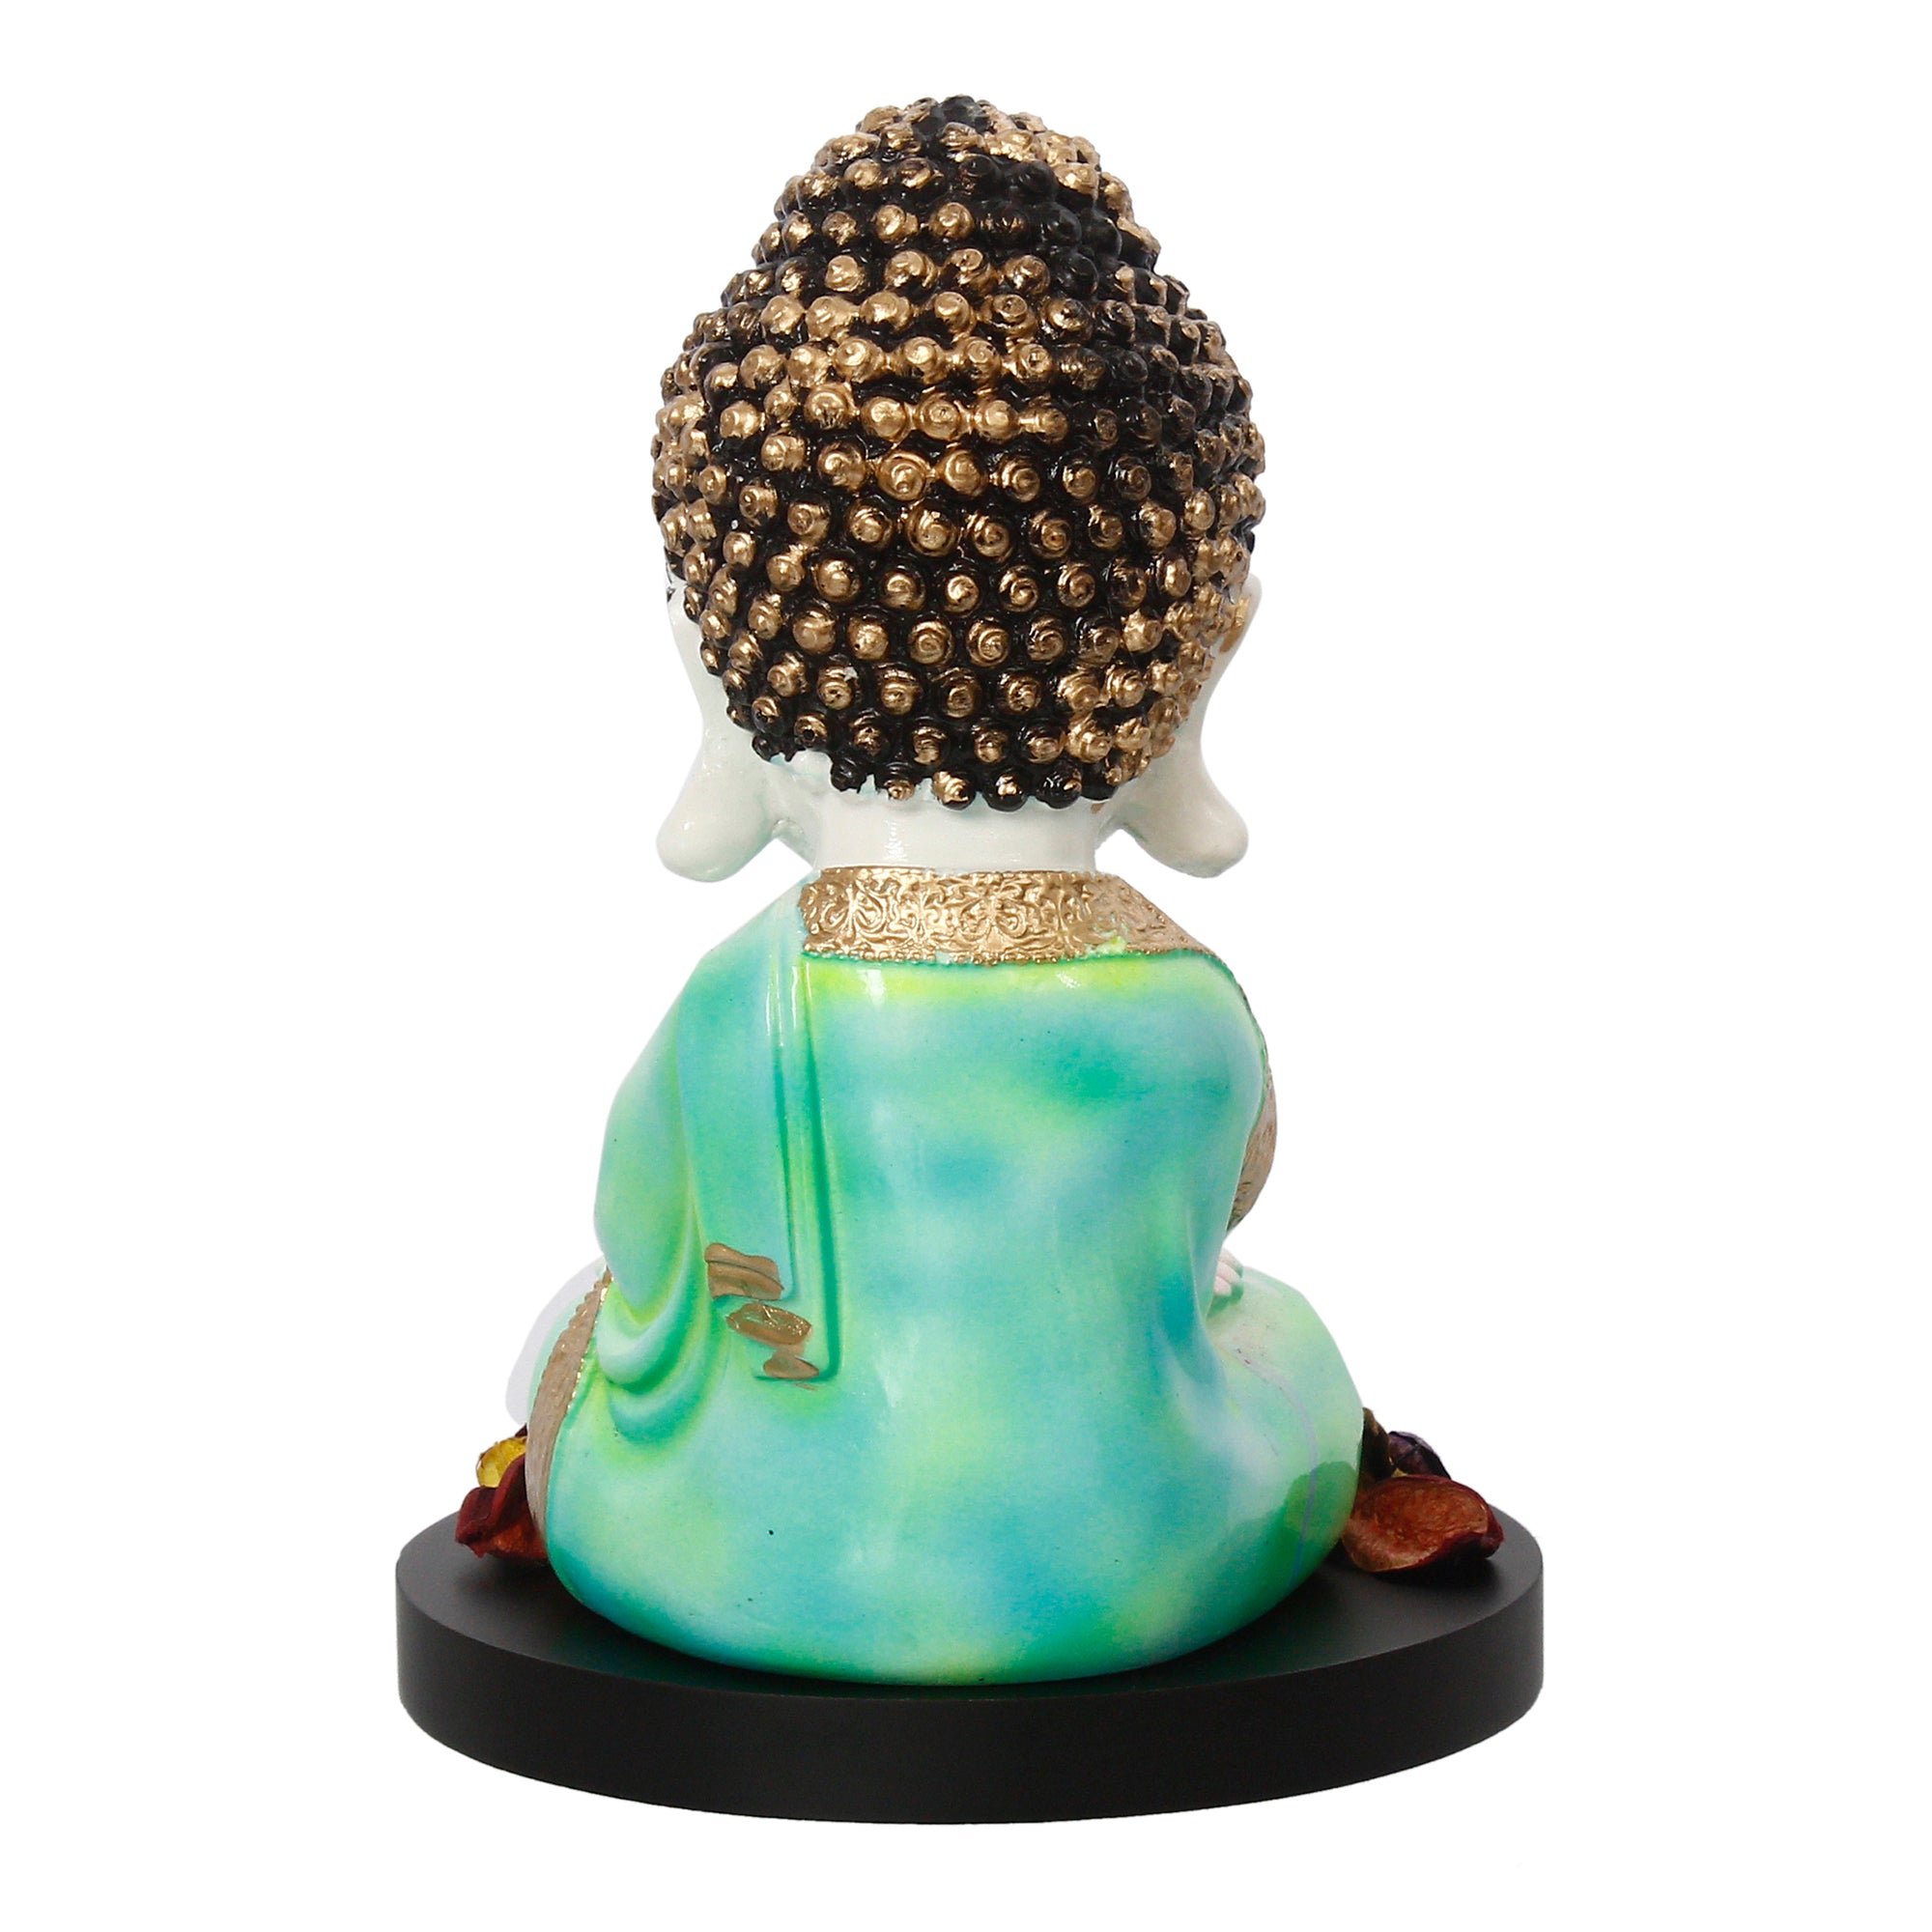 Polyresin Green and White Praying Monk Buddha Statue with Wooden Base, Fragranced Petals and Tealight 6